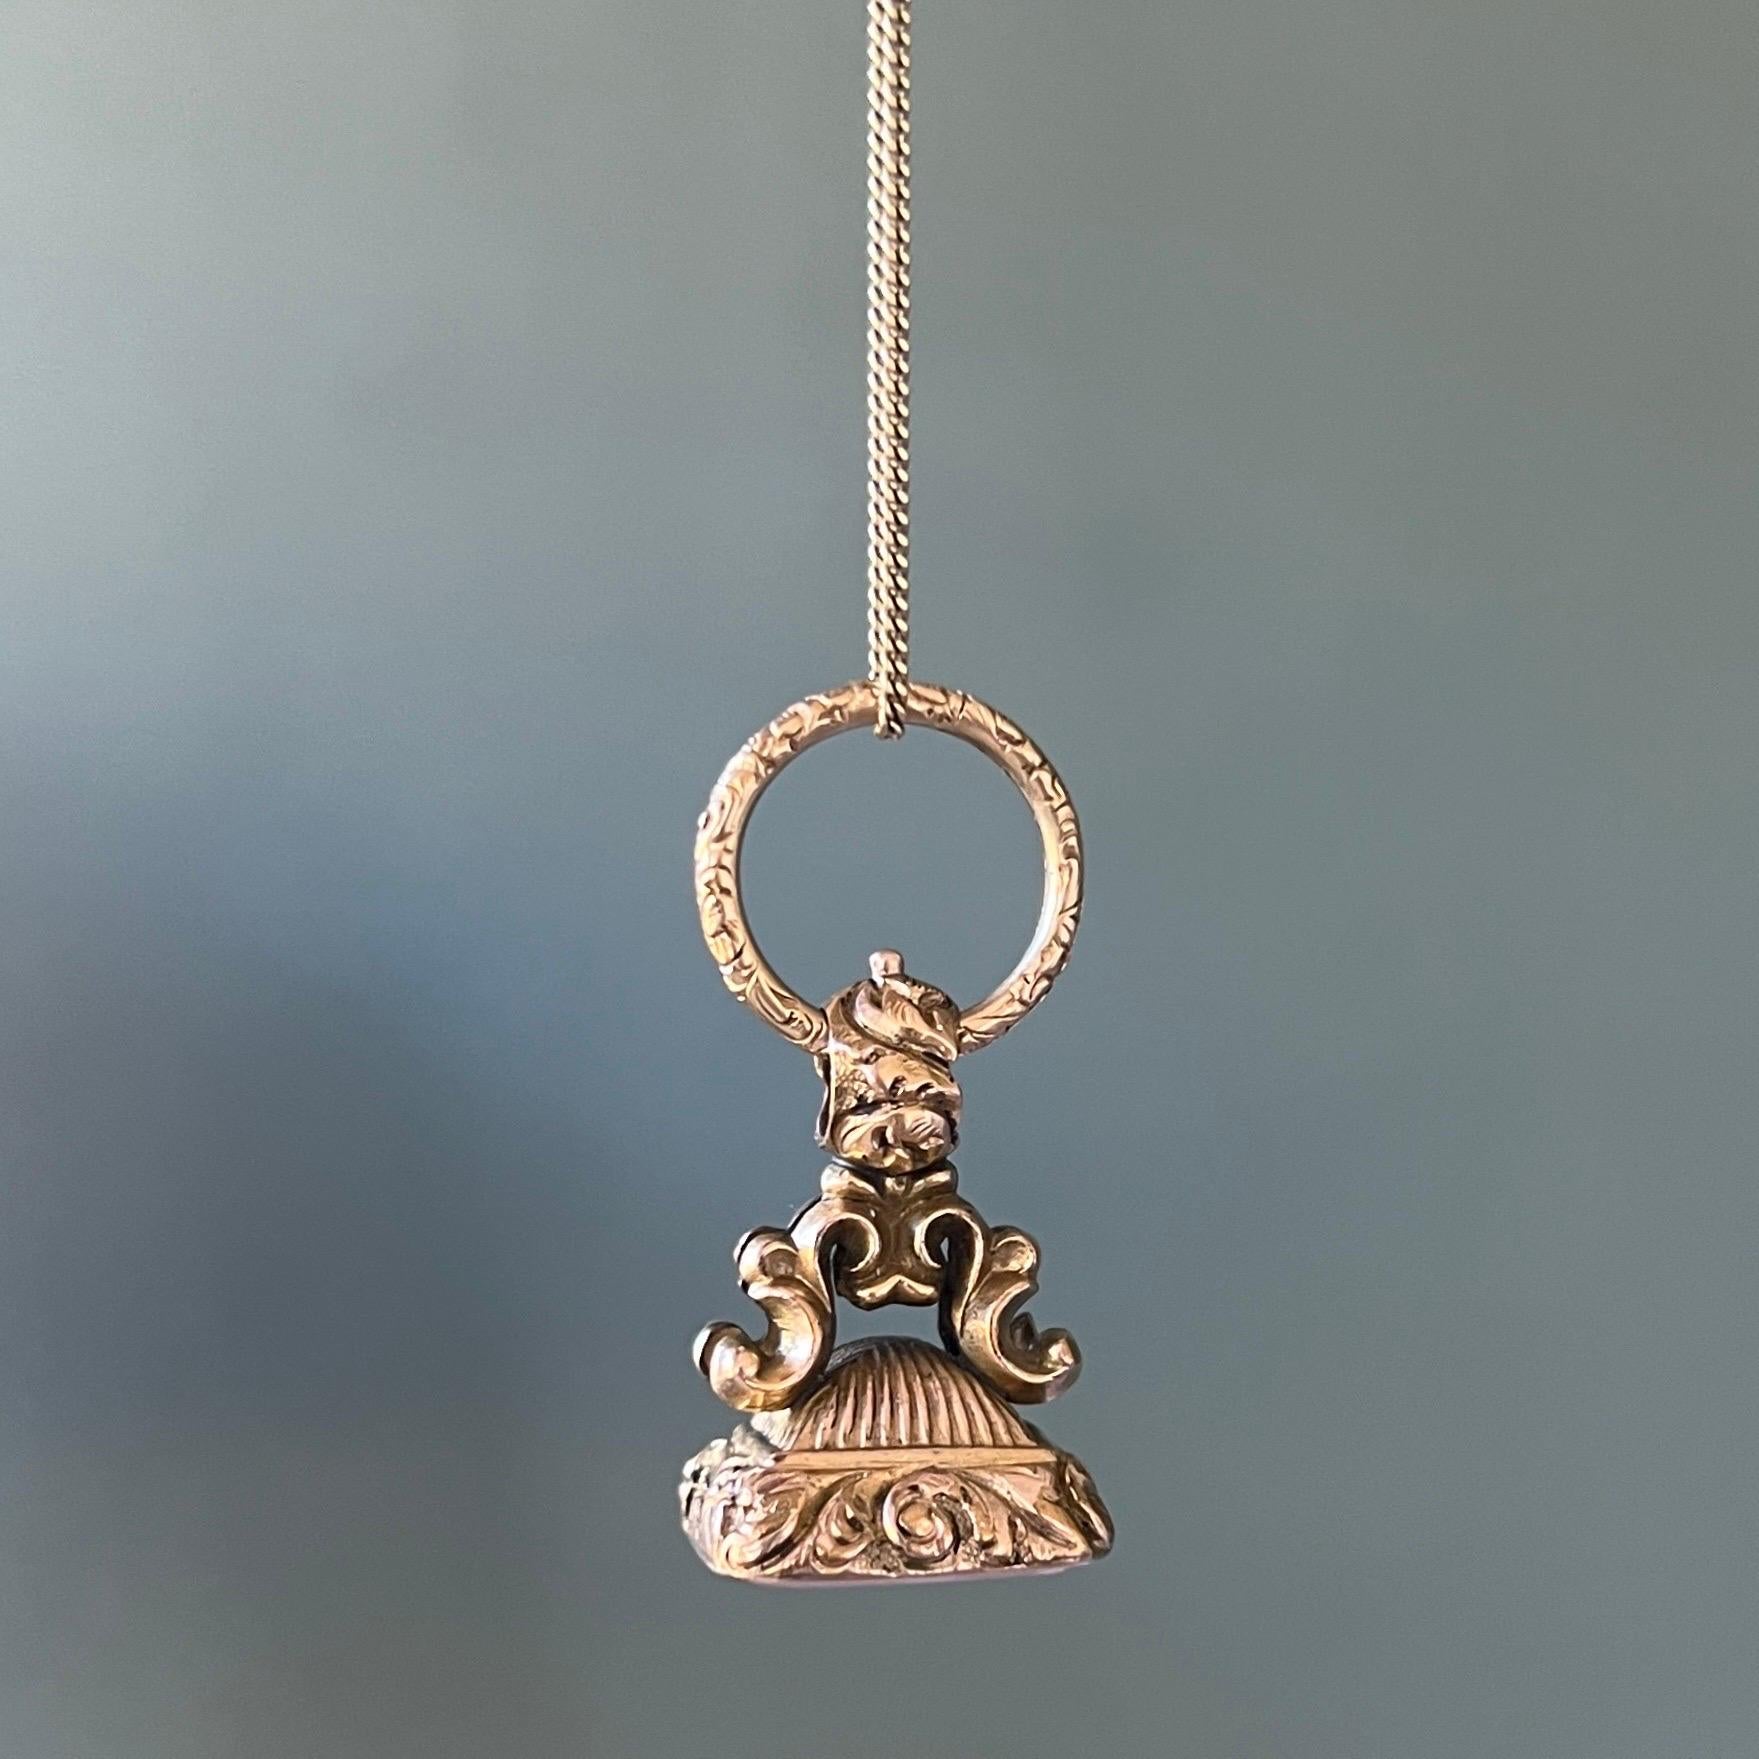 An antique early Victorian 9 karat gold seal fob pendant. This gorgeous seal fob with typical scrolling arches leading to an integral bail attached to a gold split ring. The split ring is embellished with deeply carved patterns of floral and foliate